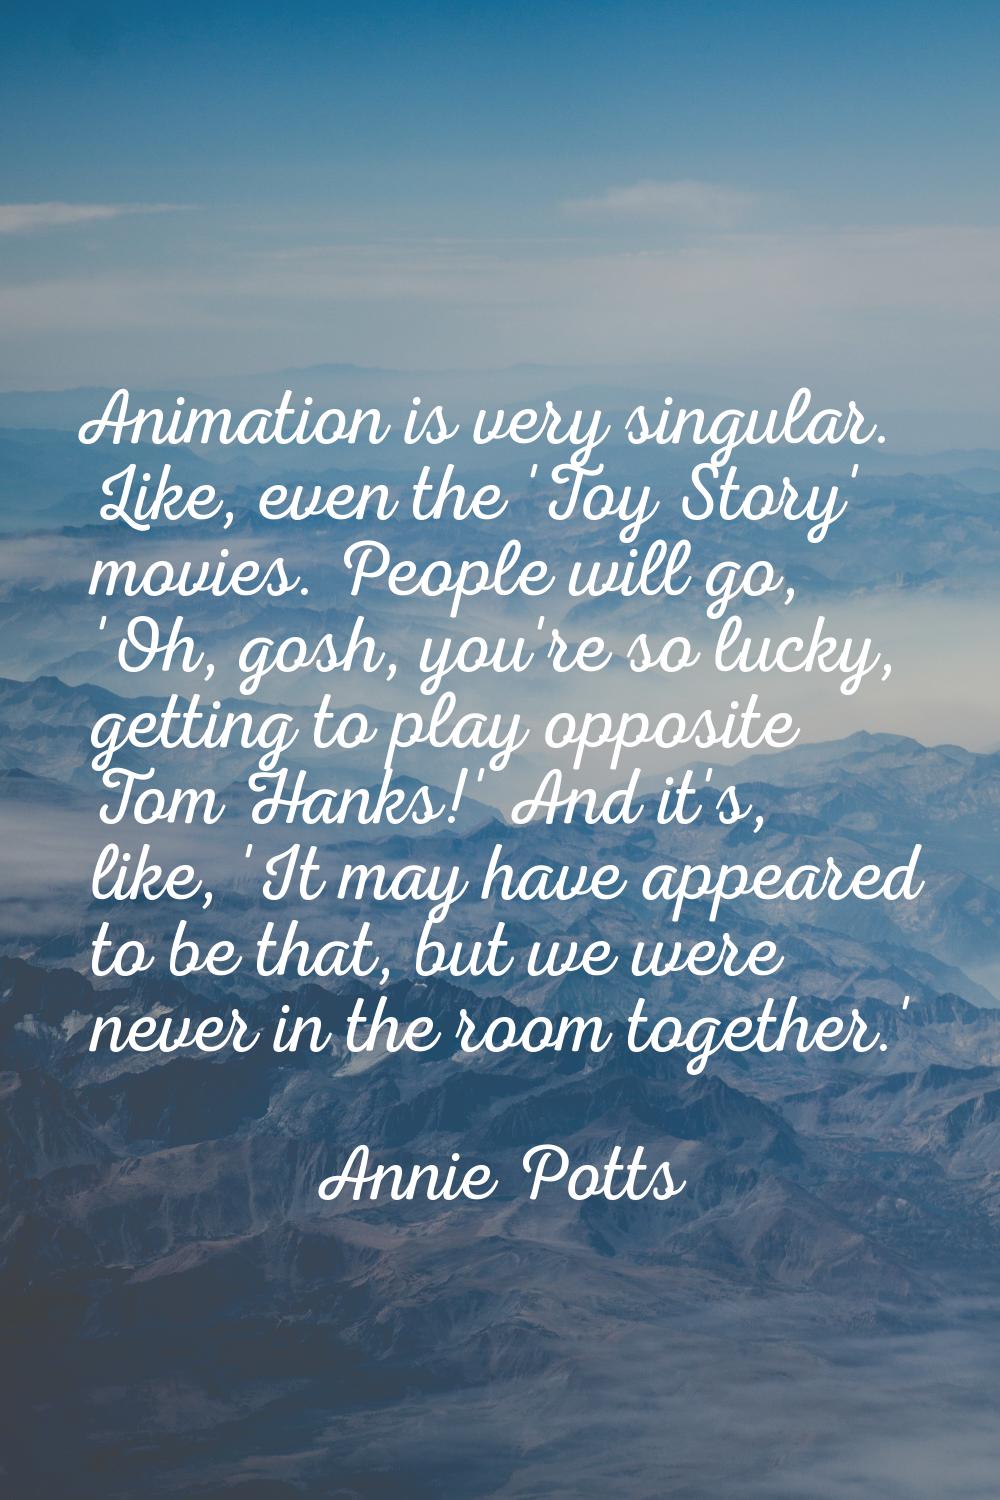 Animation is very singular. Like, even the 'Toy Story' movies. People will go, 'Oh, gosh, you're so